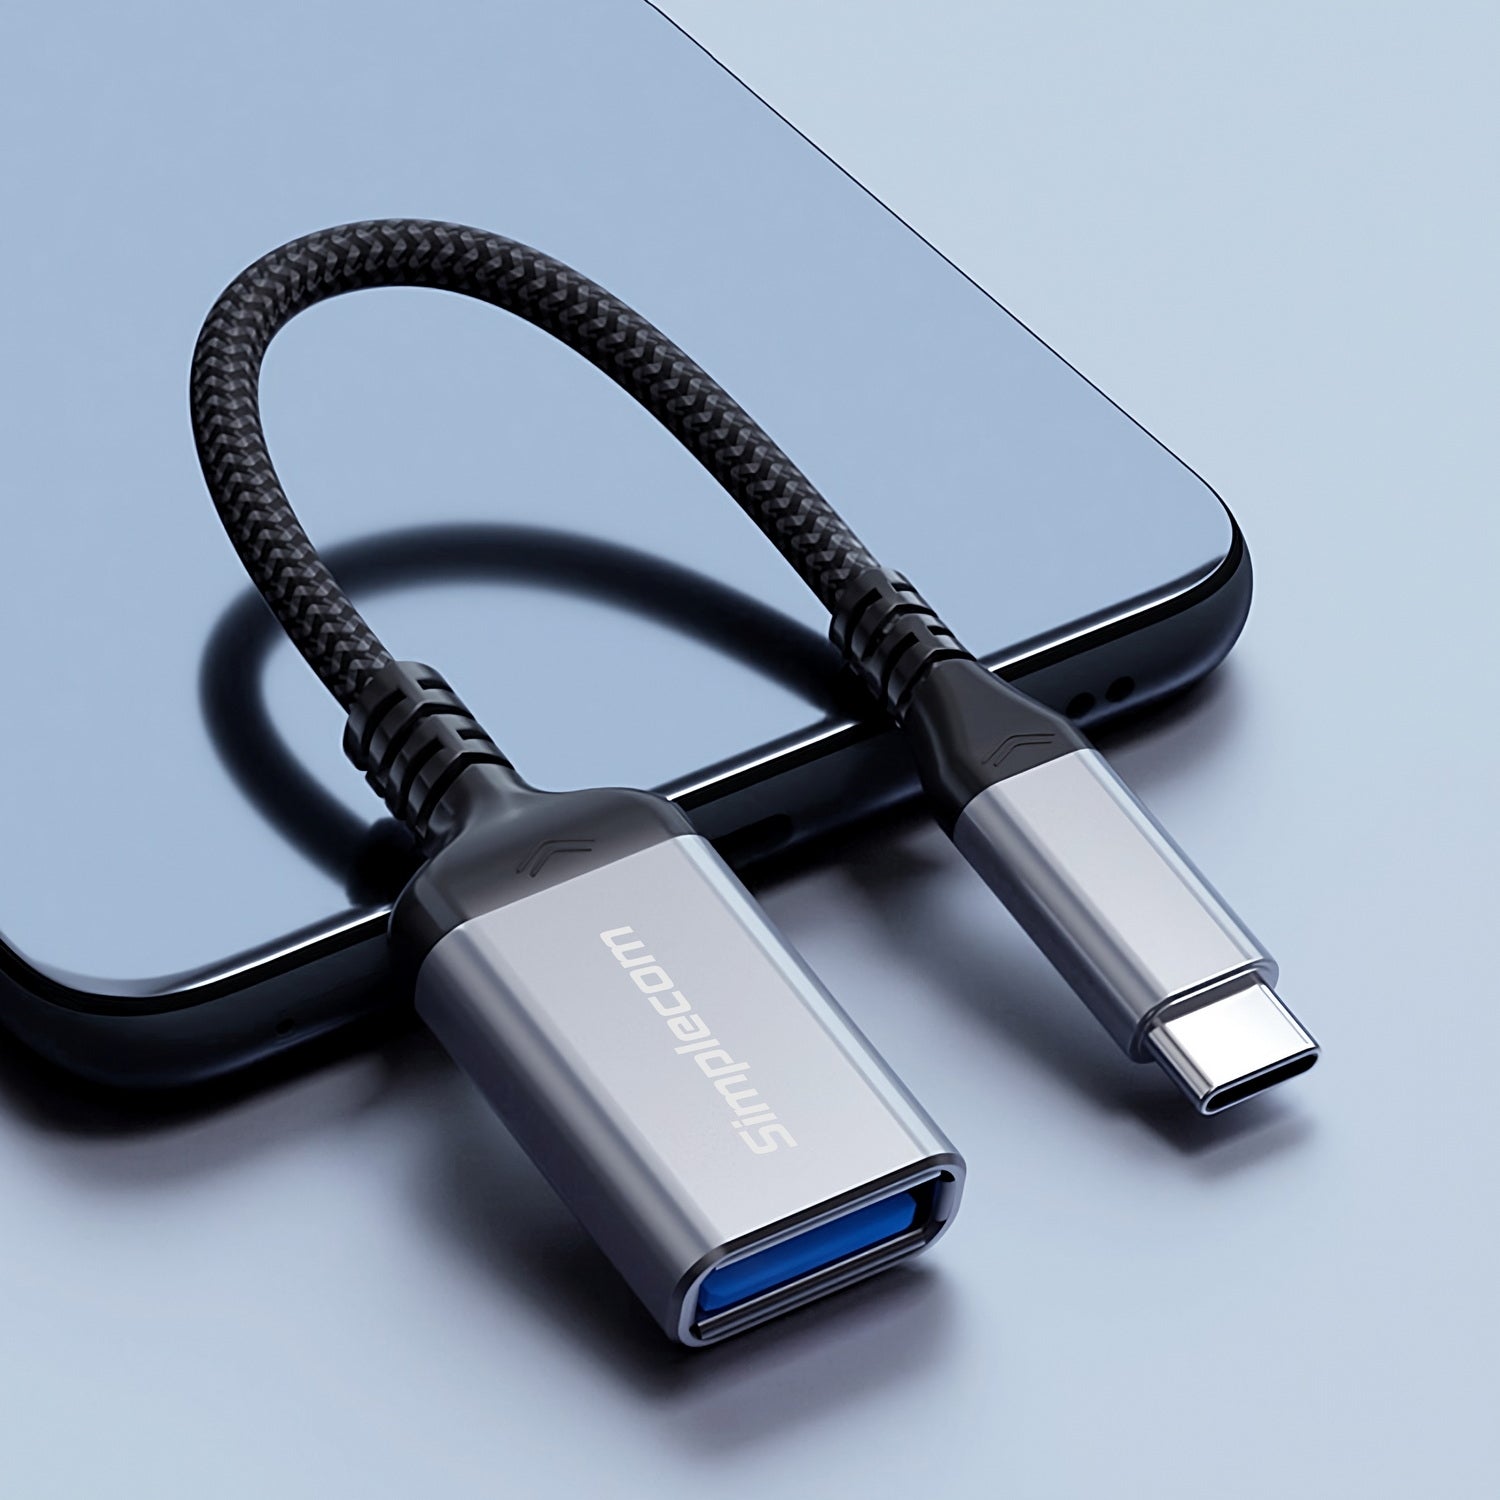 CA131 USB-C Male to USB-A Female USB 3.0 OTG Adapter Cable